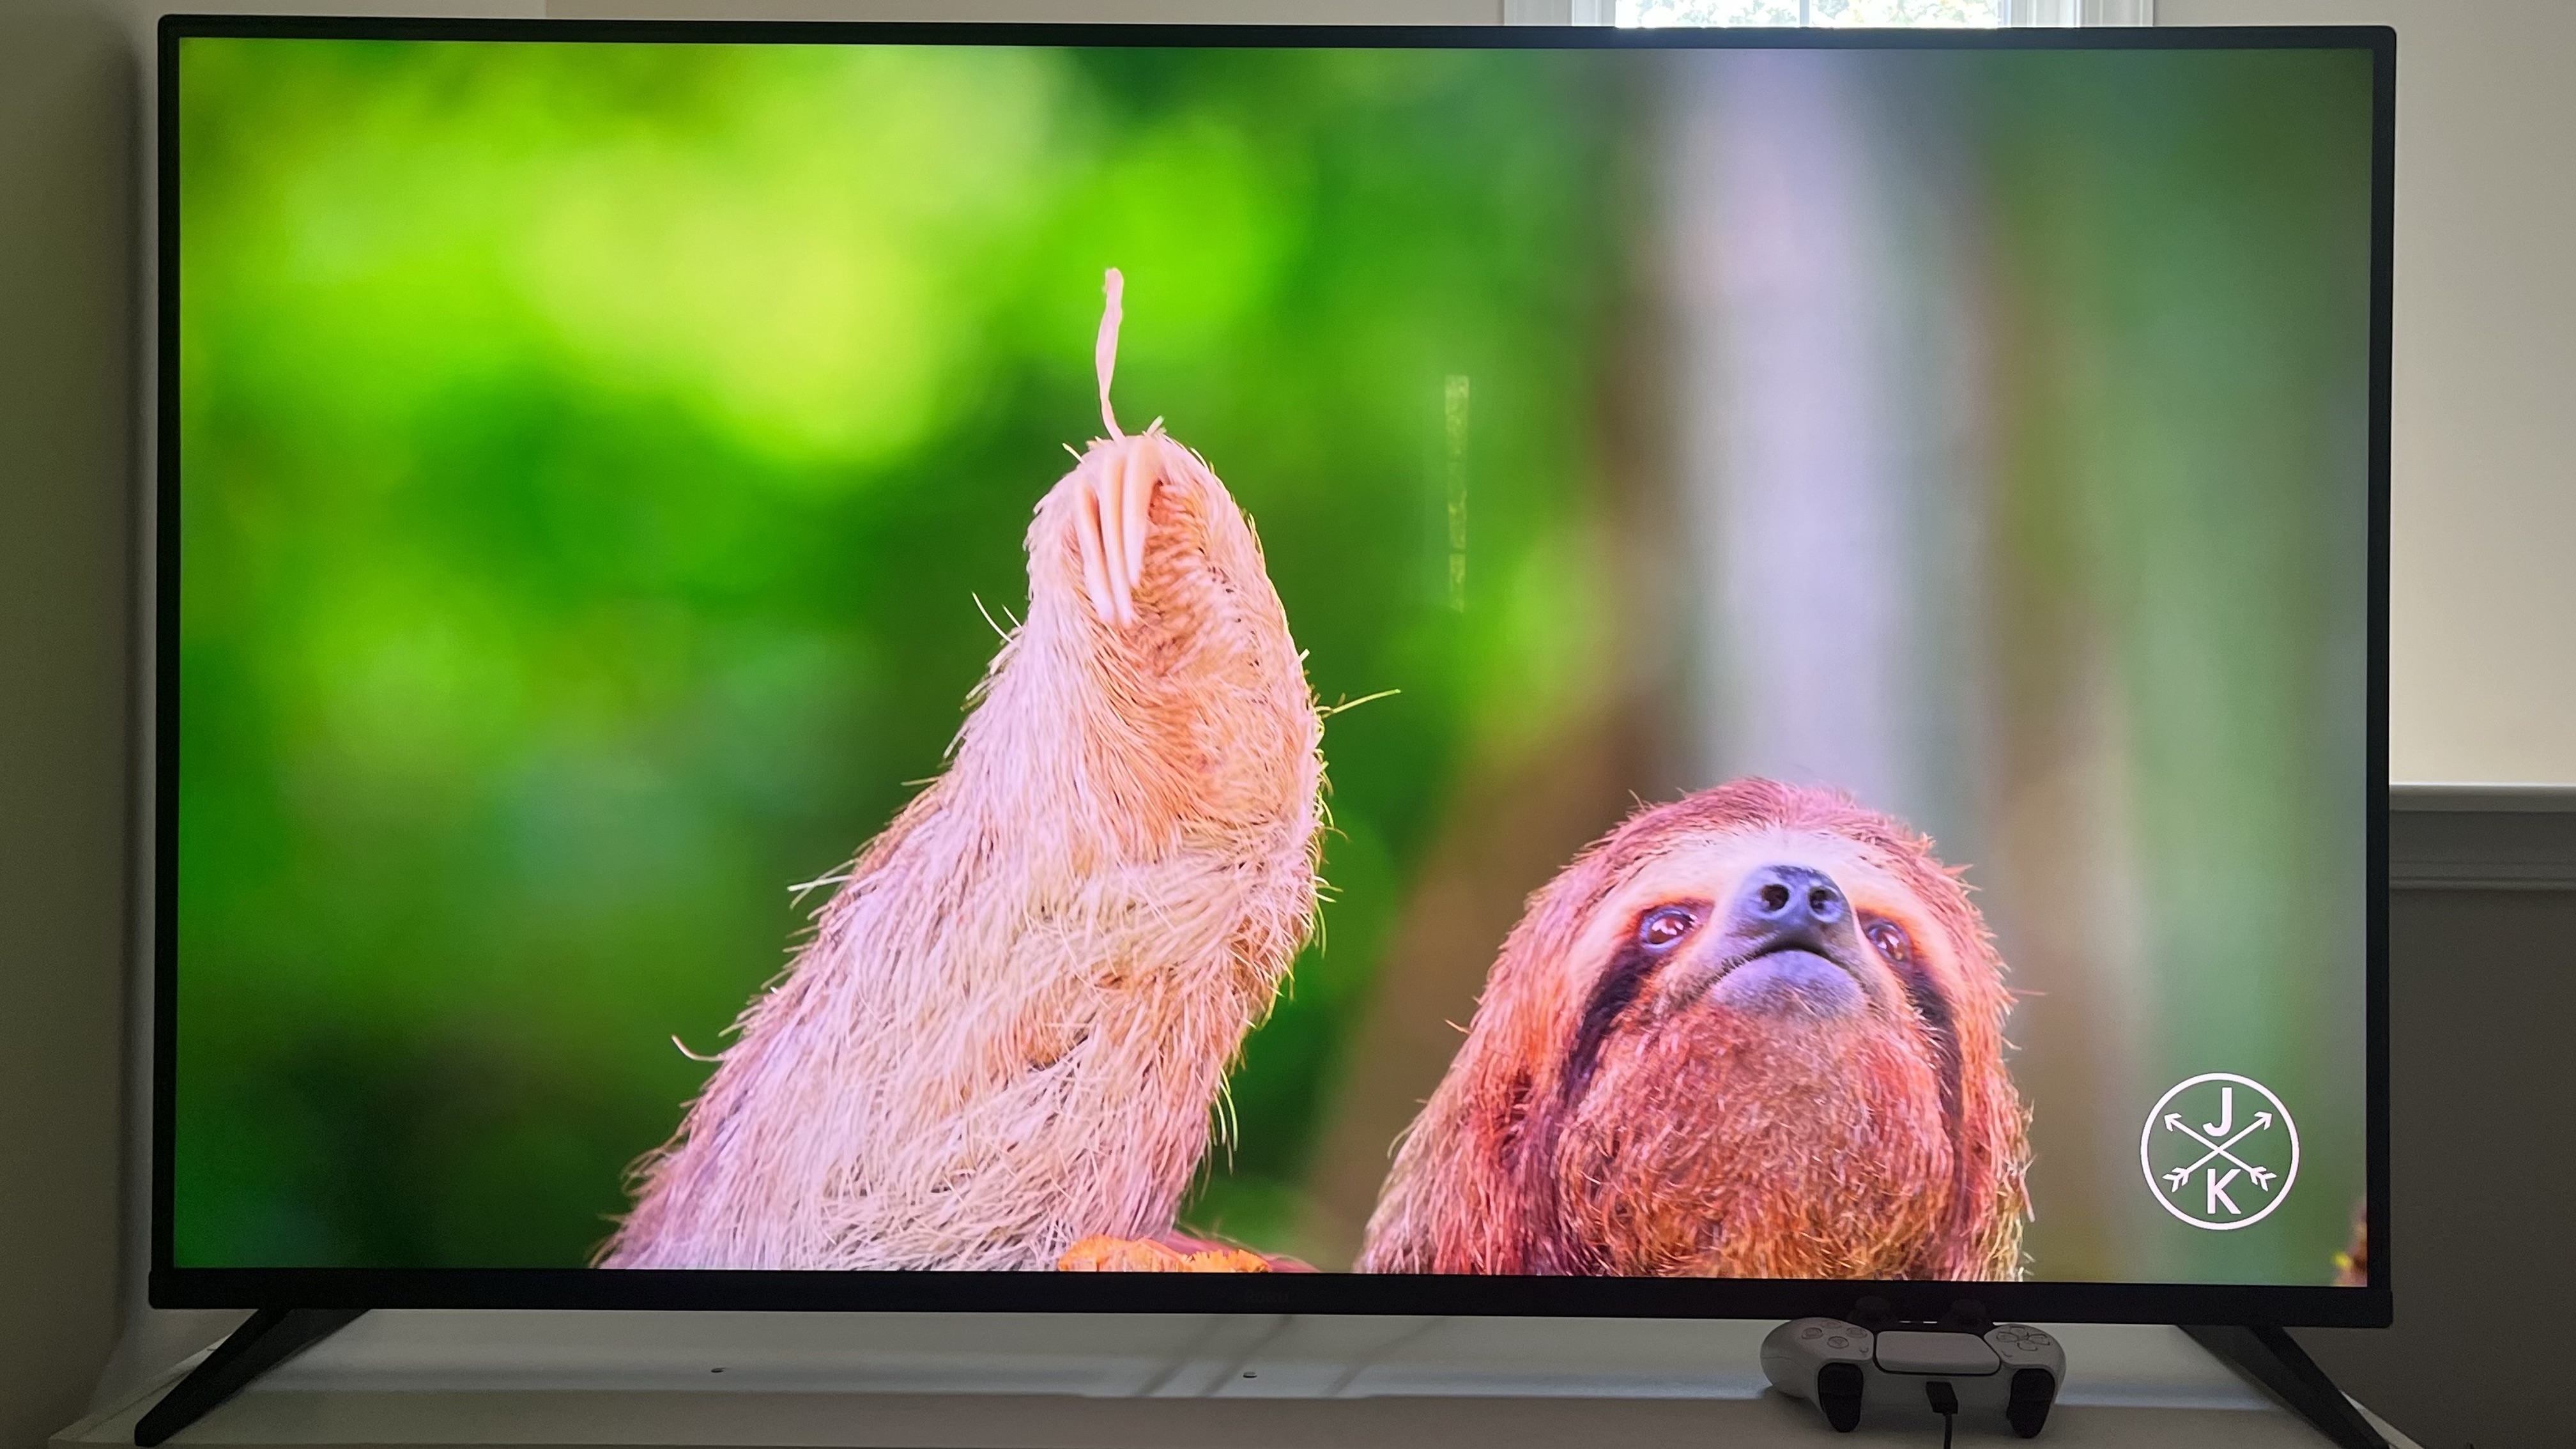 Roku Pro series  TV showing creature on screen